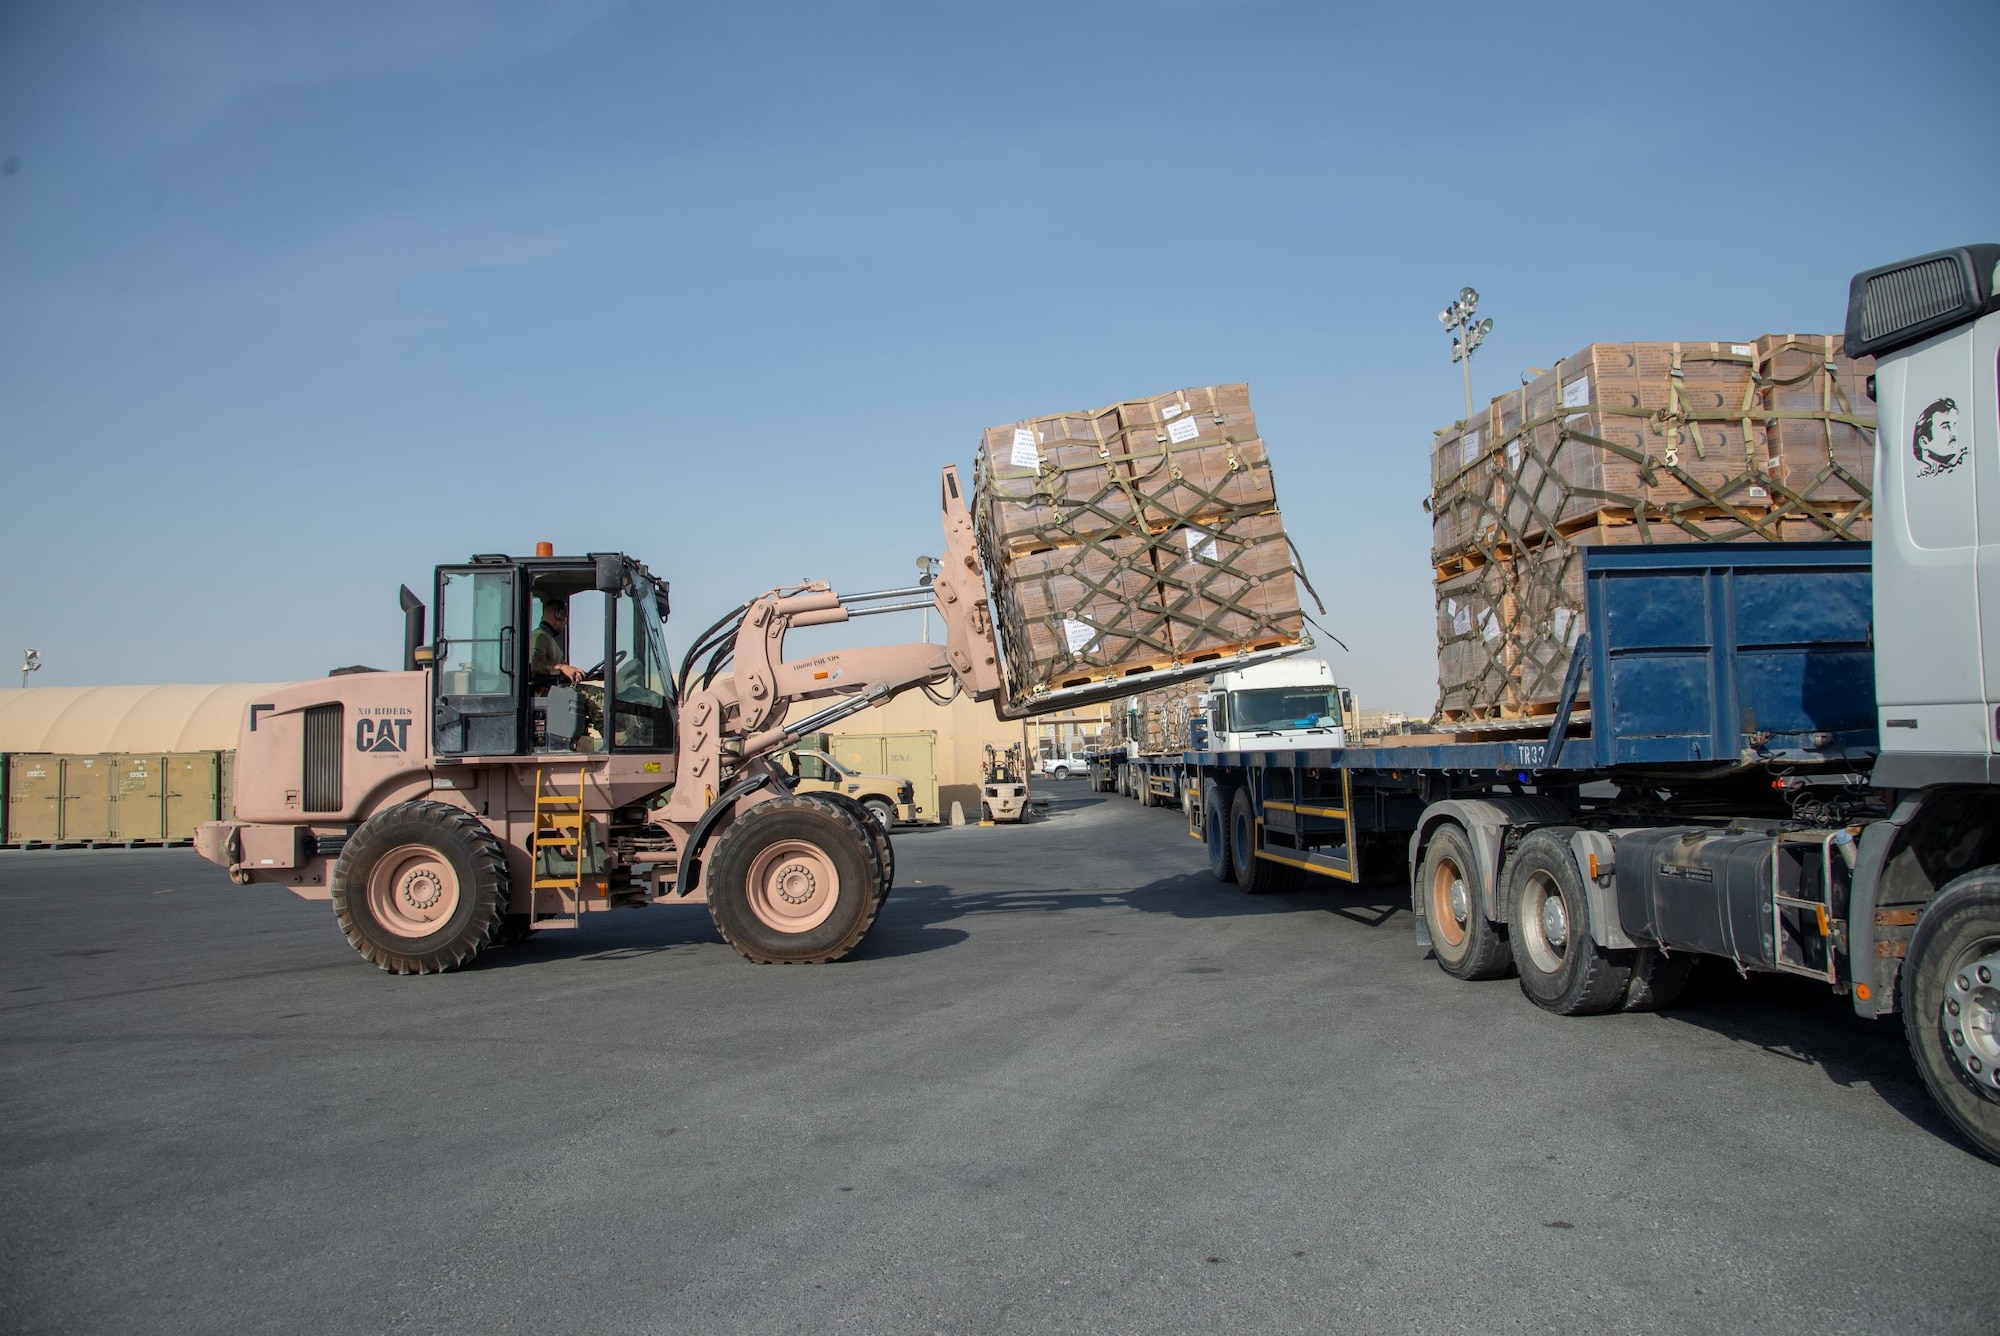 U.S. aid including food, water, and medical supplies in route to supply relief to those affected in Lebanon.